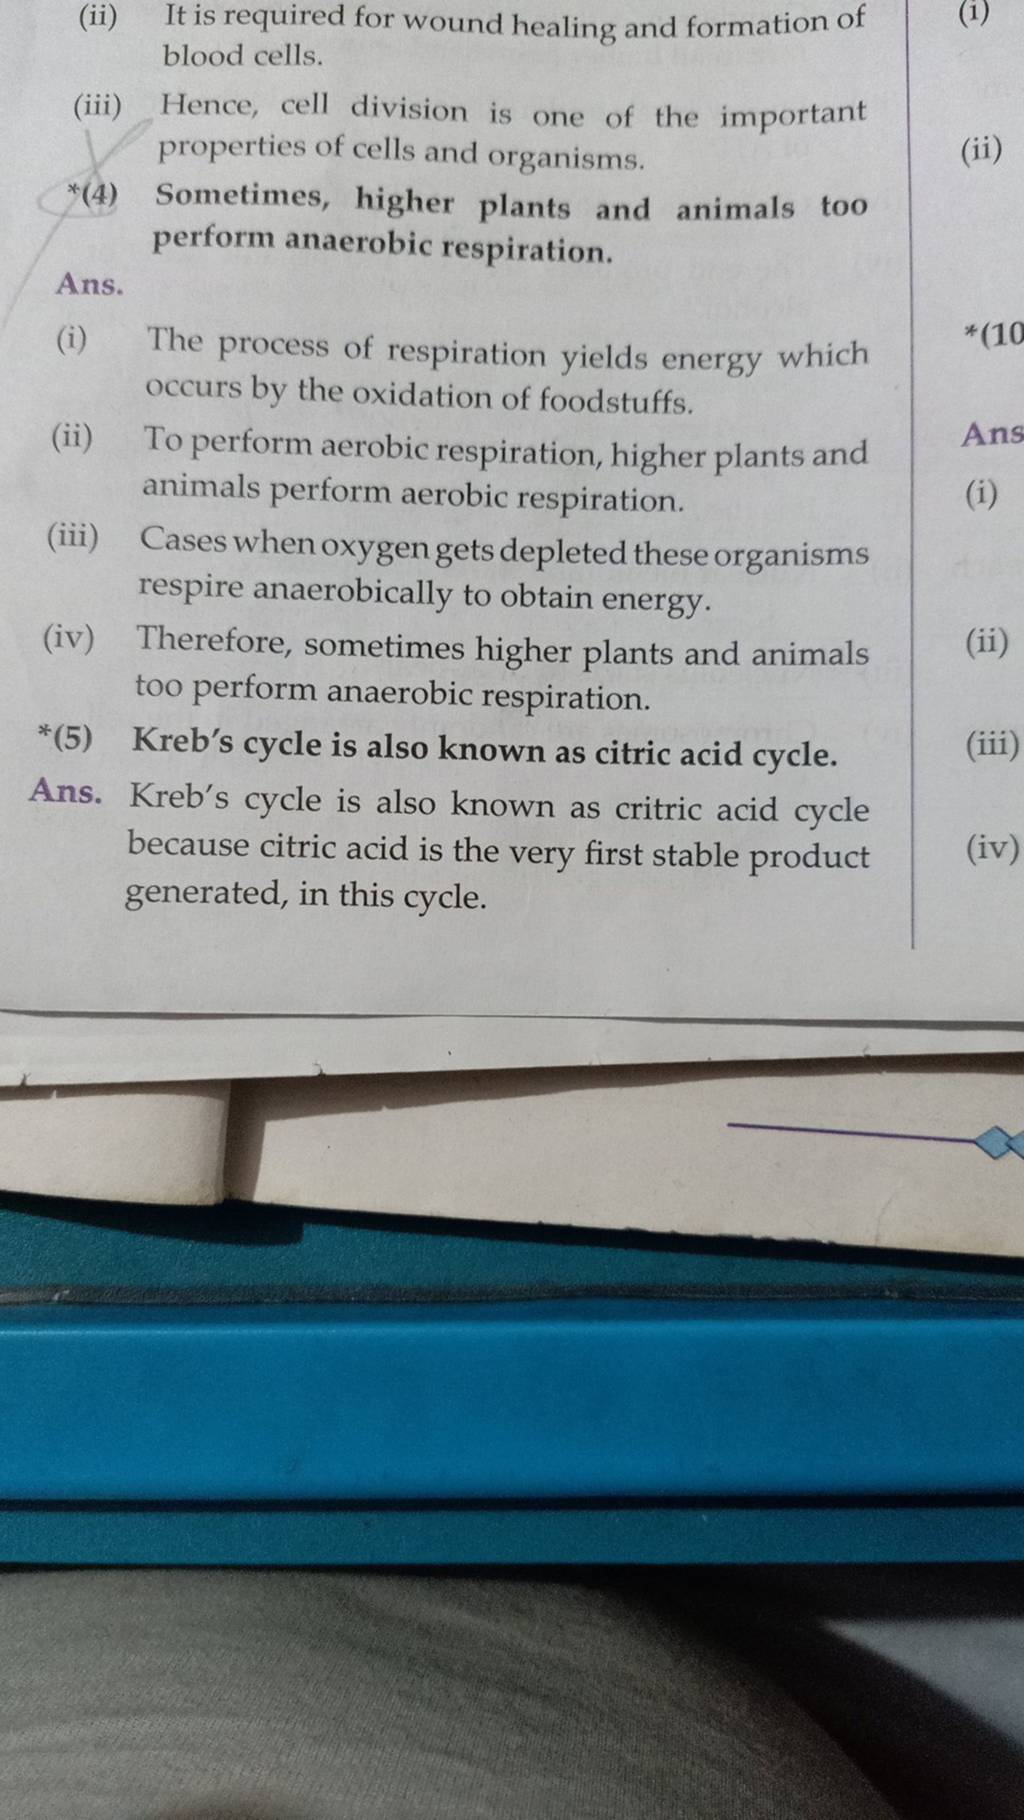 Sometimes, higher plants and animals too perform anaerobic respiration. (..